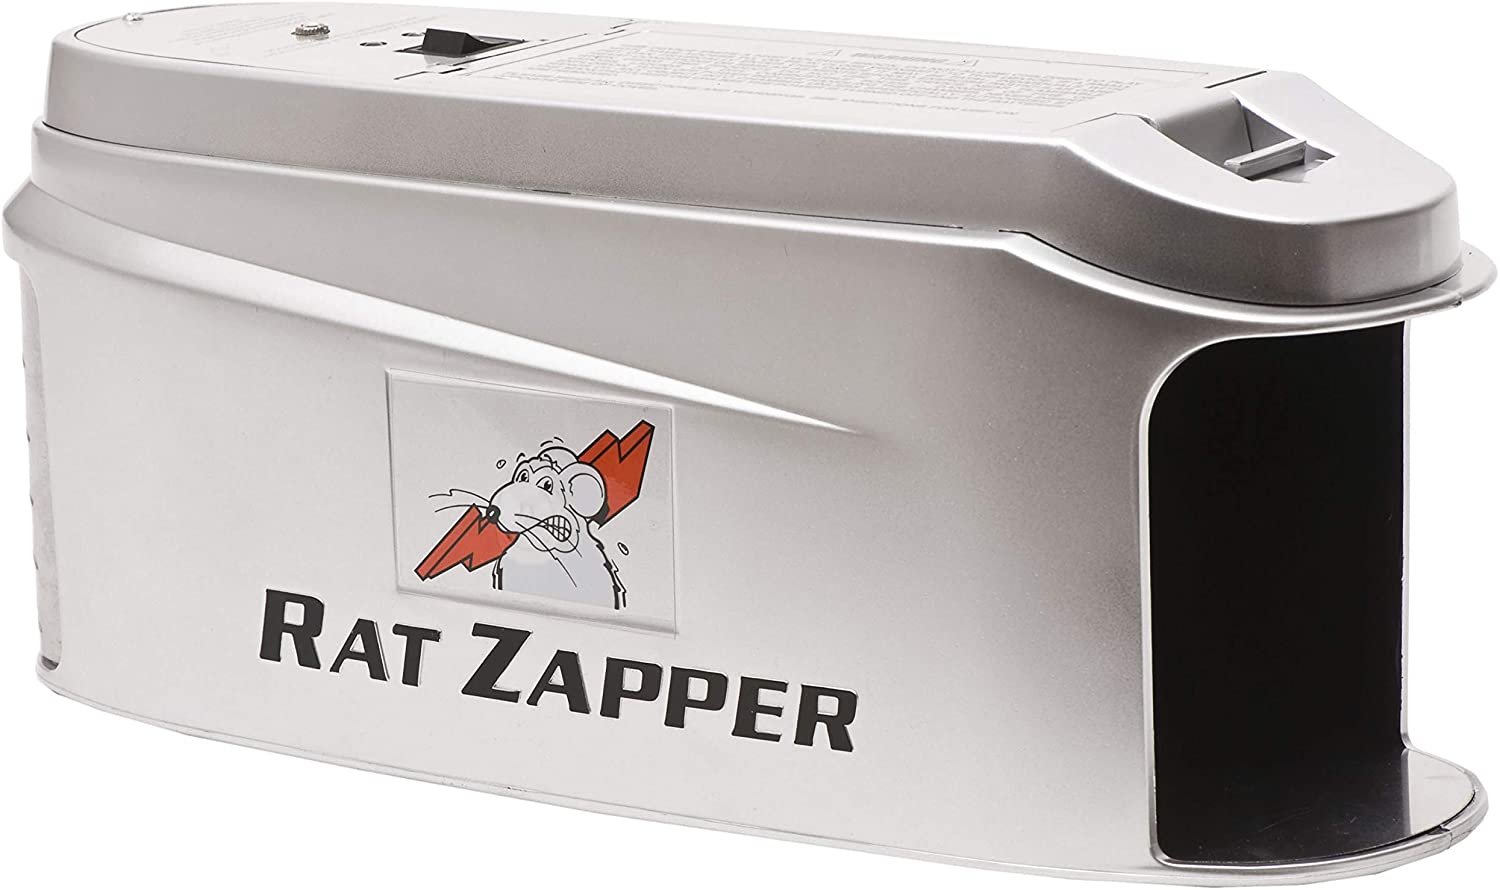 Rat Zapper Ultra RZU001-4 Electronic Rat Trap - Indoor, 1 Trap, Free Shipping